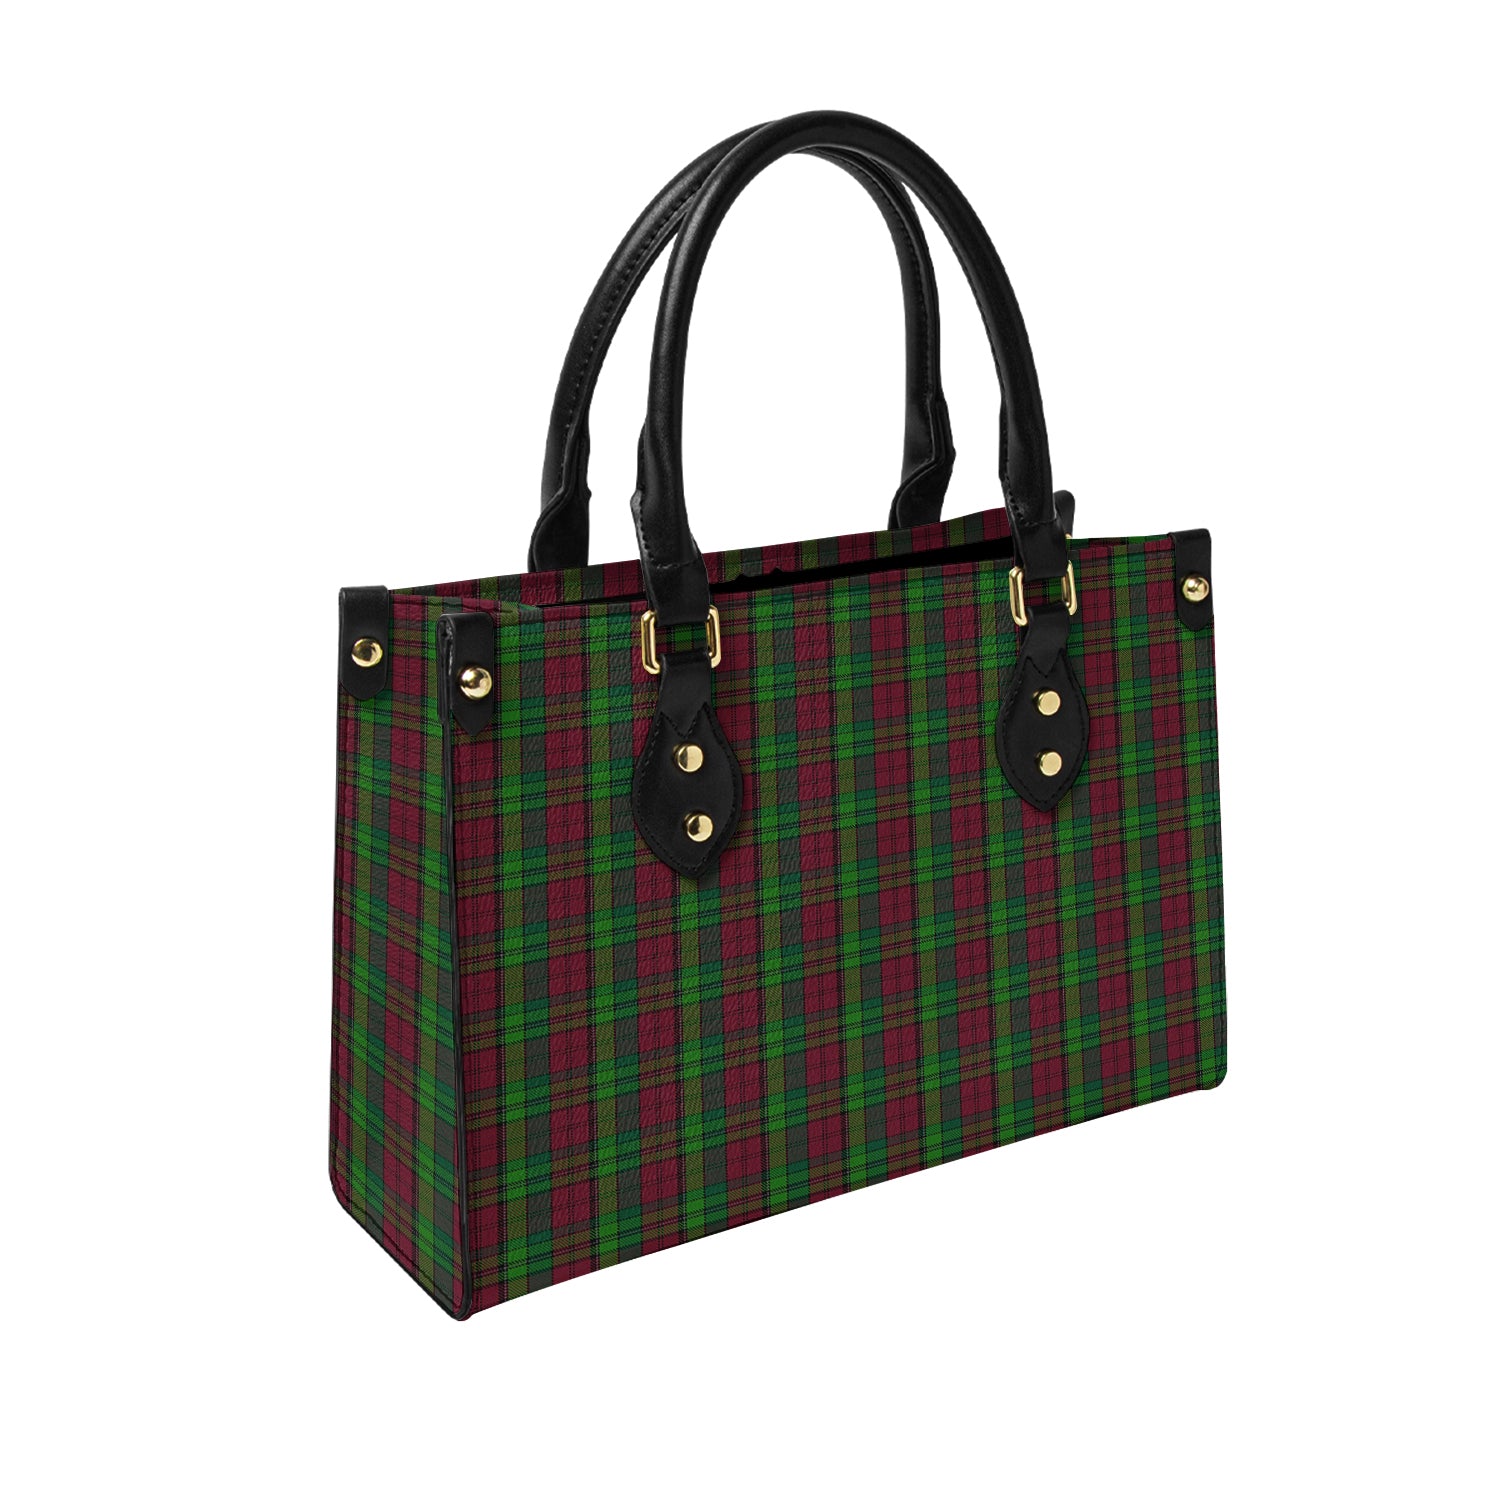 pope-of-wales-tartan-leather-bag